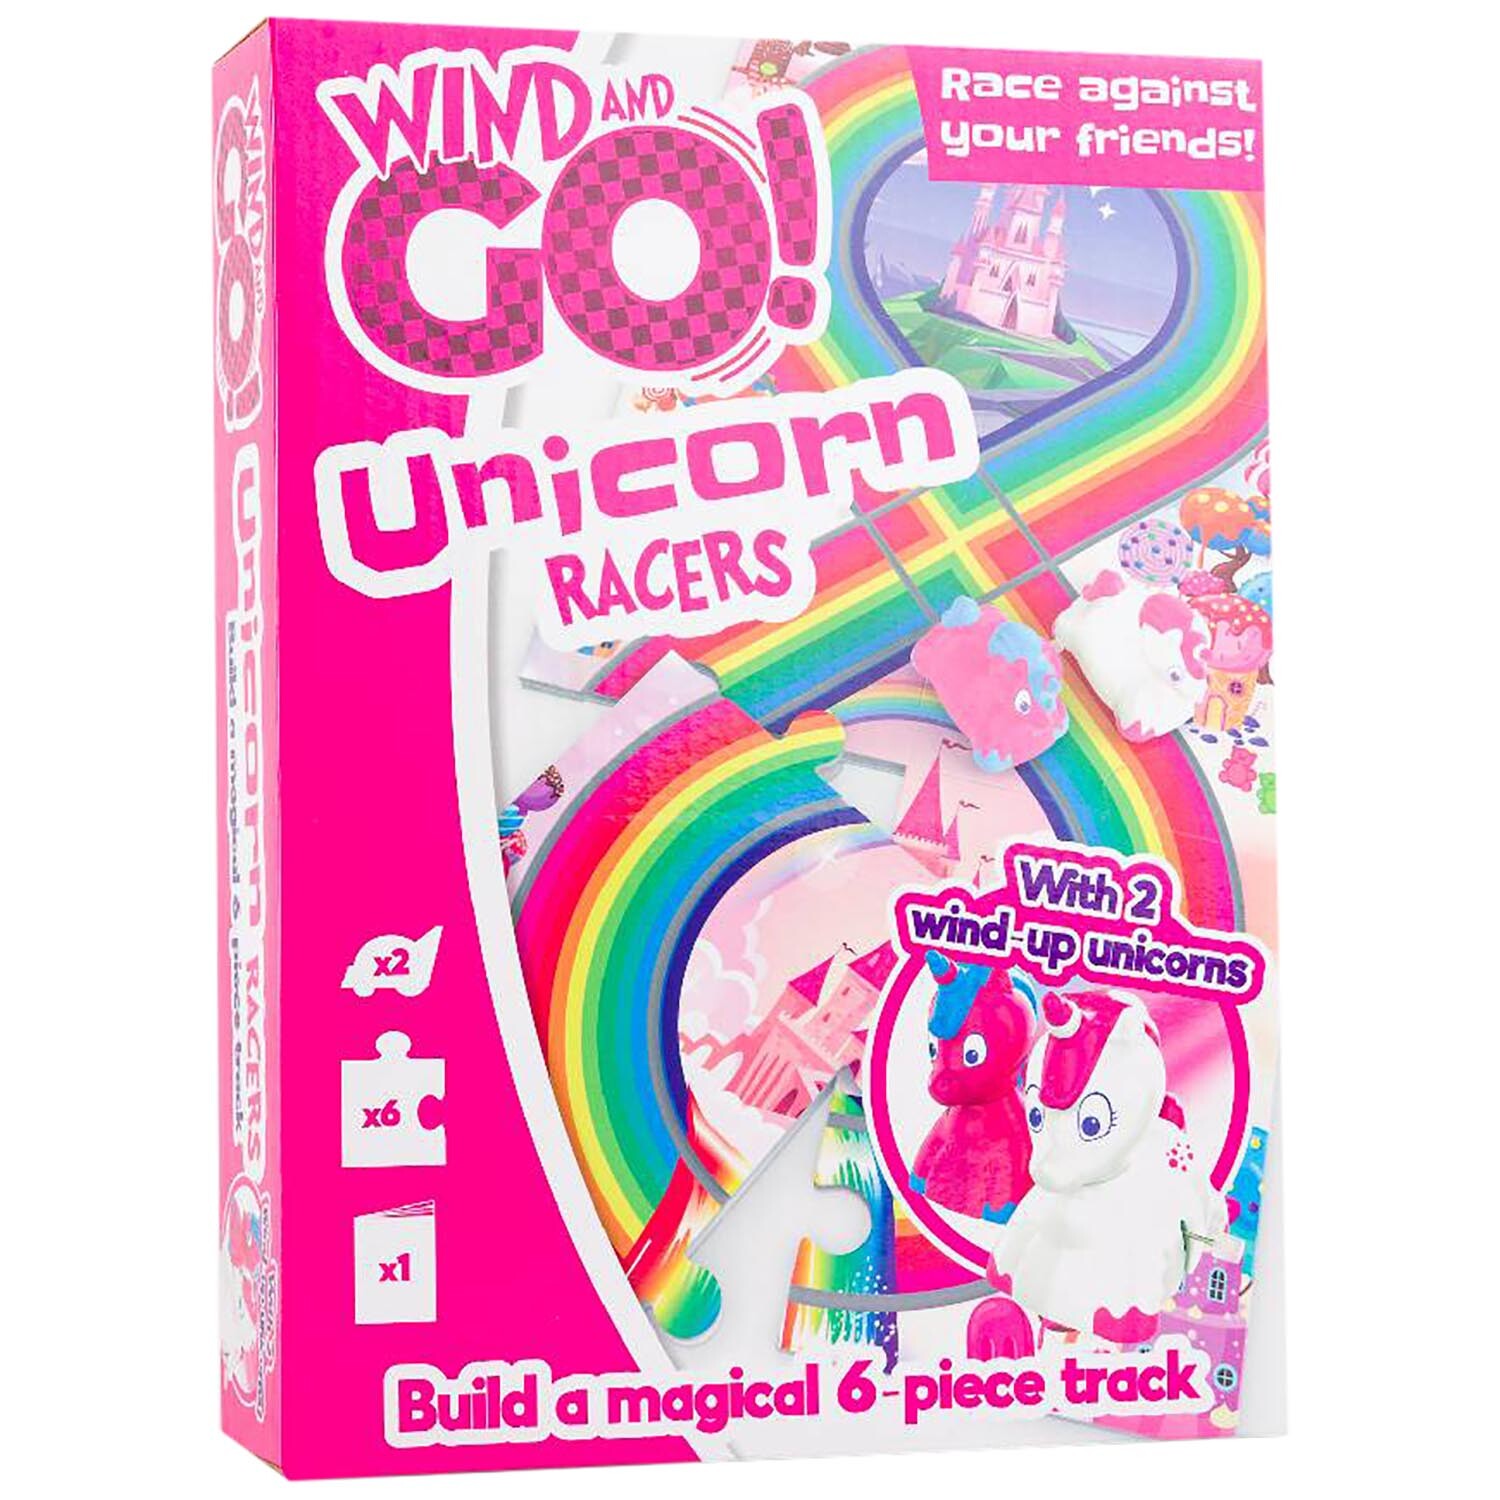 Wind and Go Unicorn Racers Puzzle Game Image